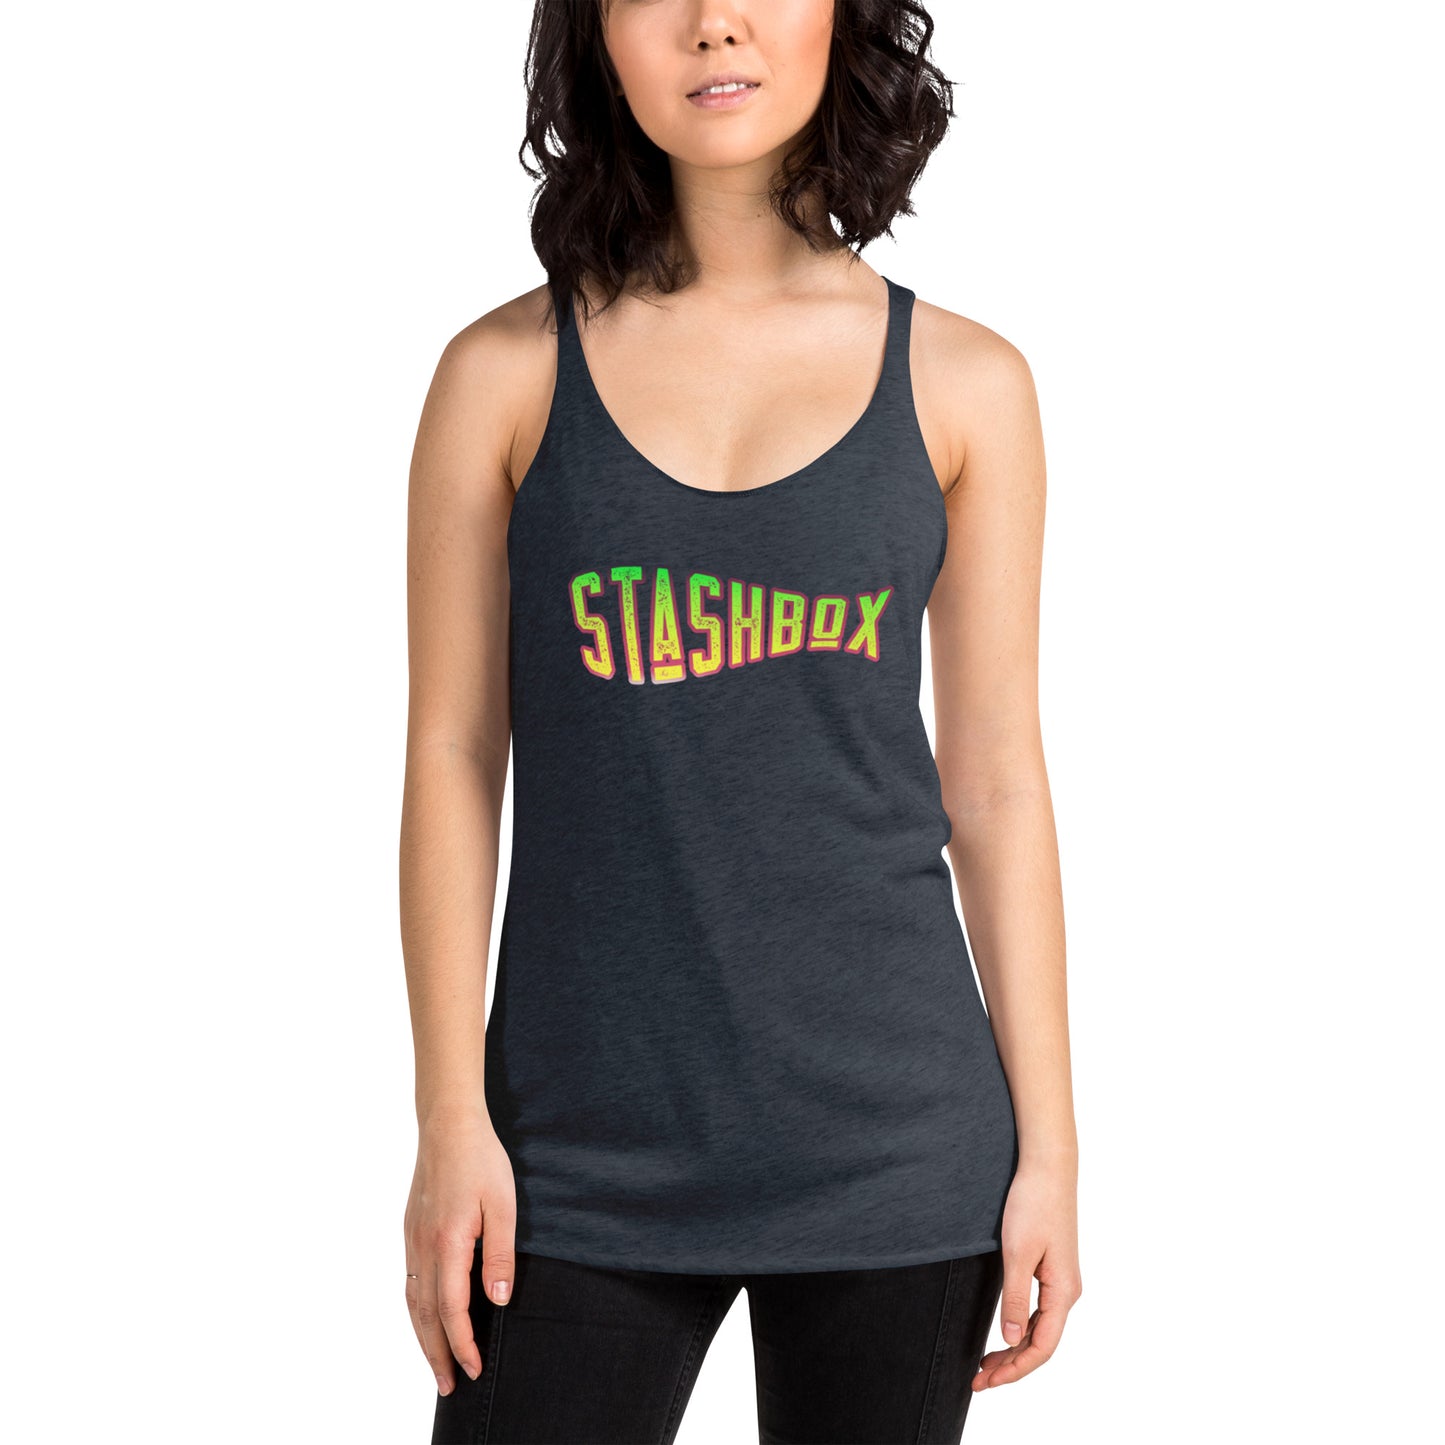 Elevate your style with our Women's Stashbox Racerback Tank Top Shirt, featuring the exclusive design #011. Embrace fashion and comfort in one, only with Stashbox.